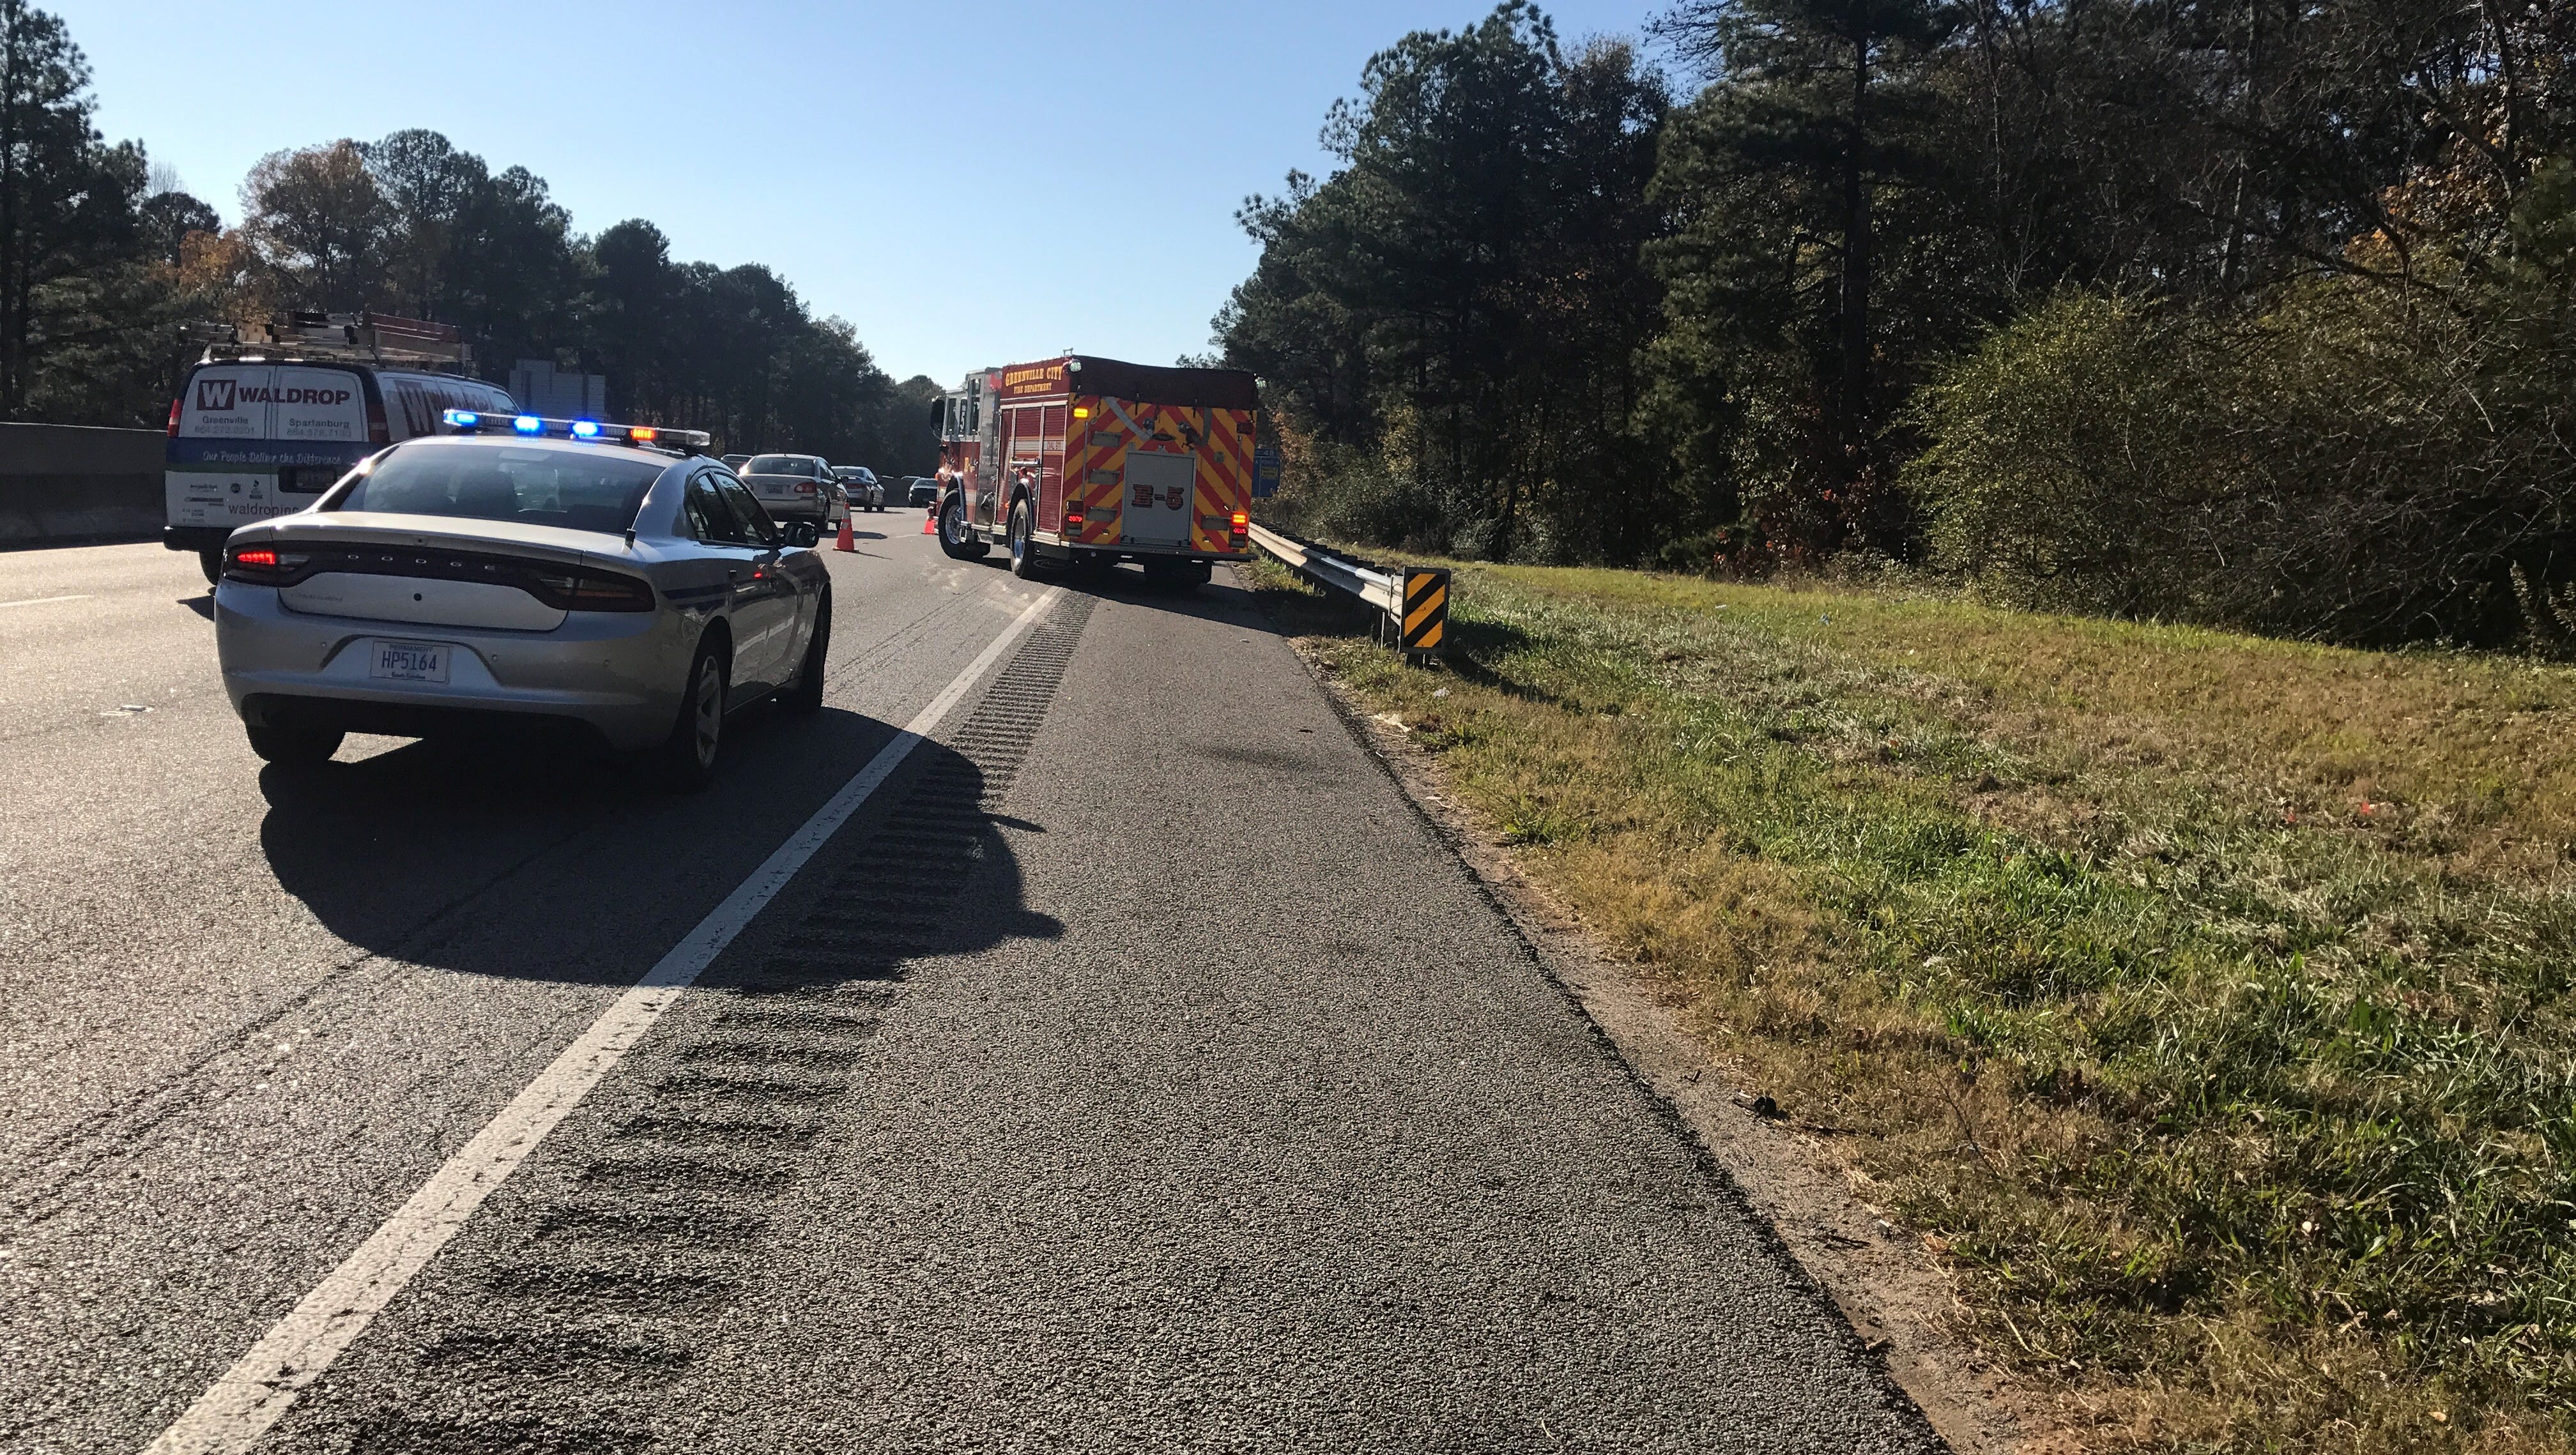 20-year-old man killed in crash on I-85 in Greenville County